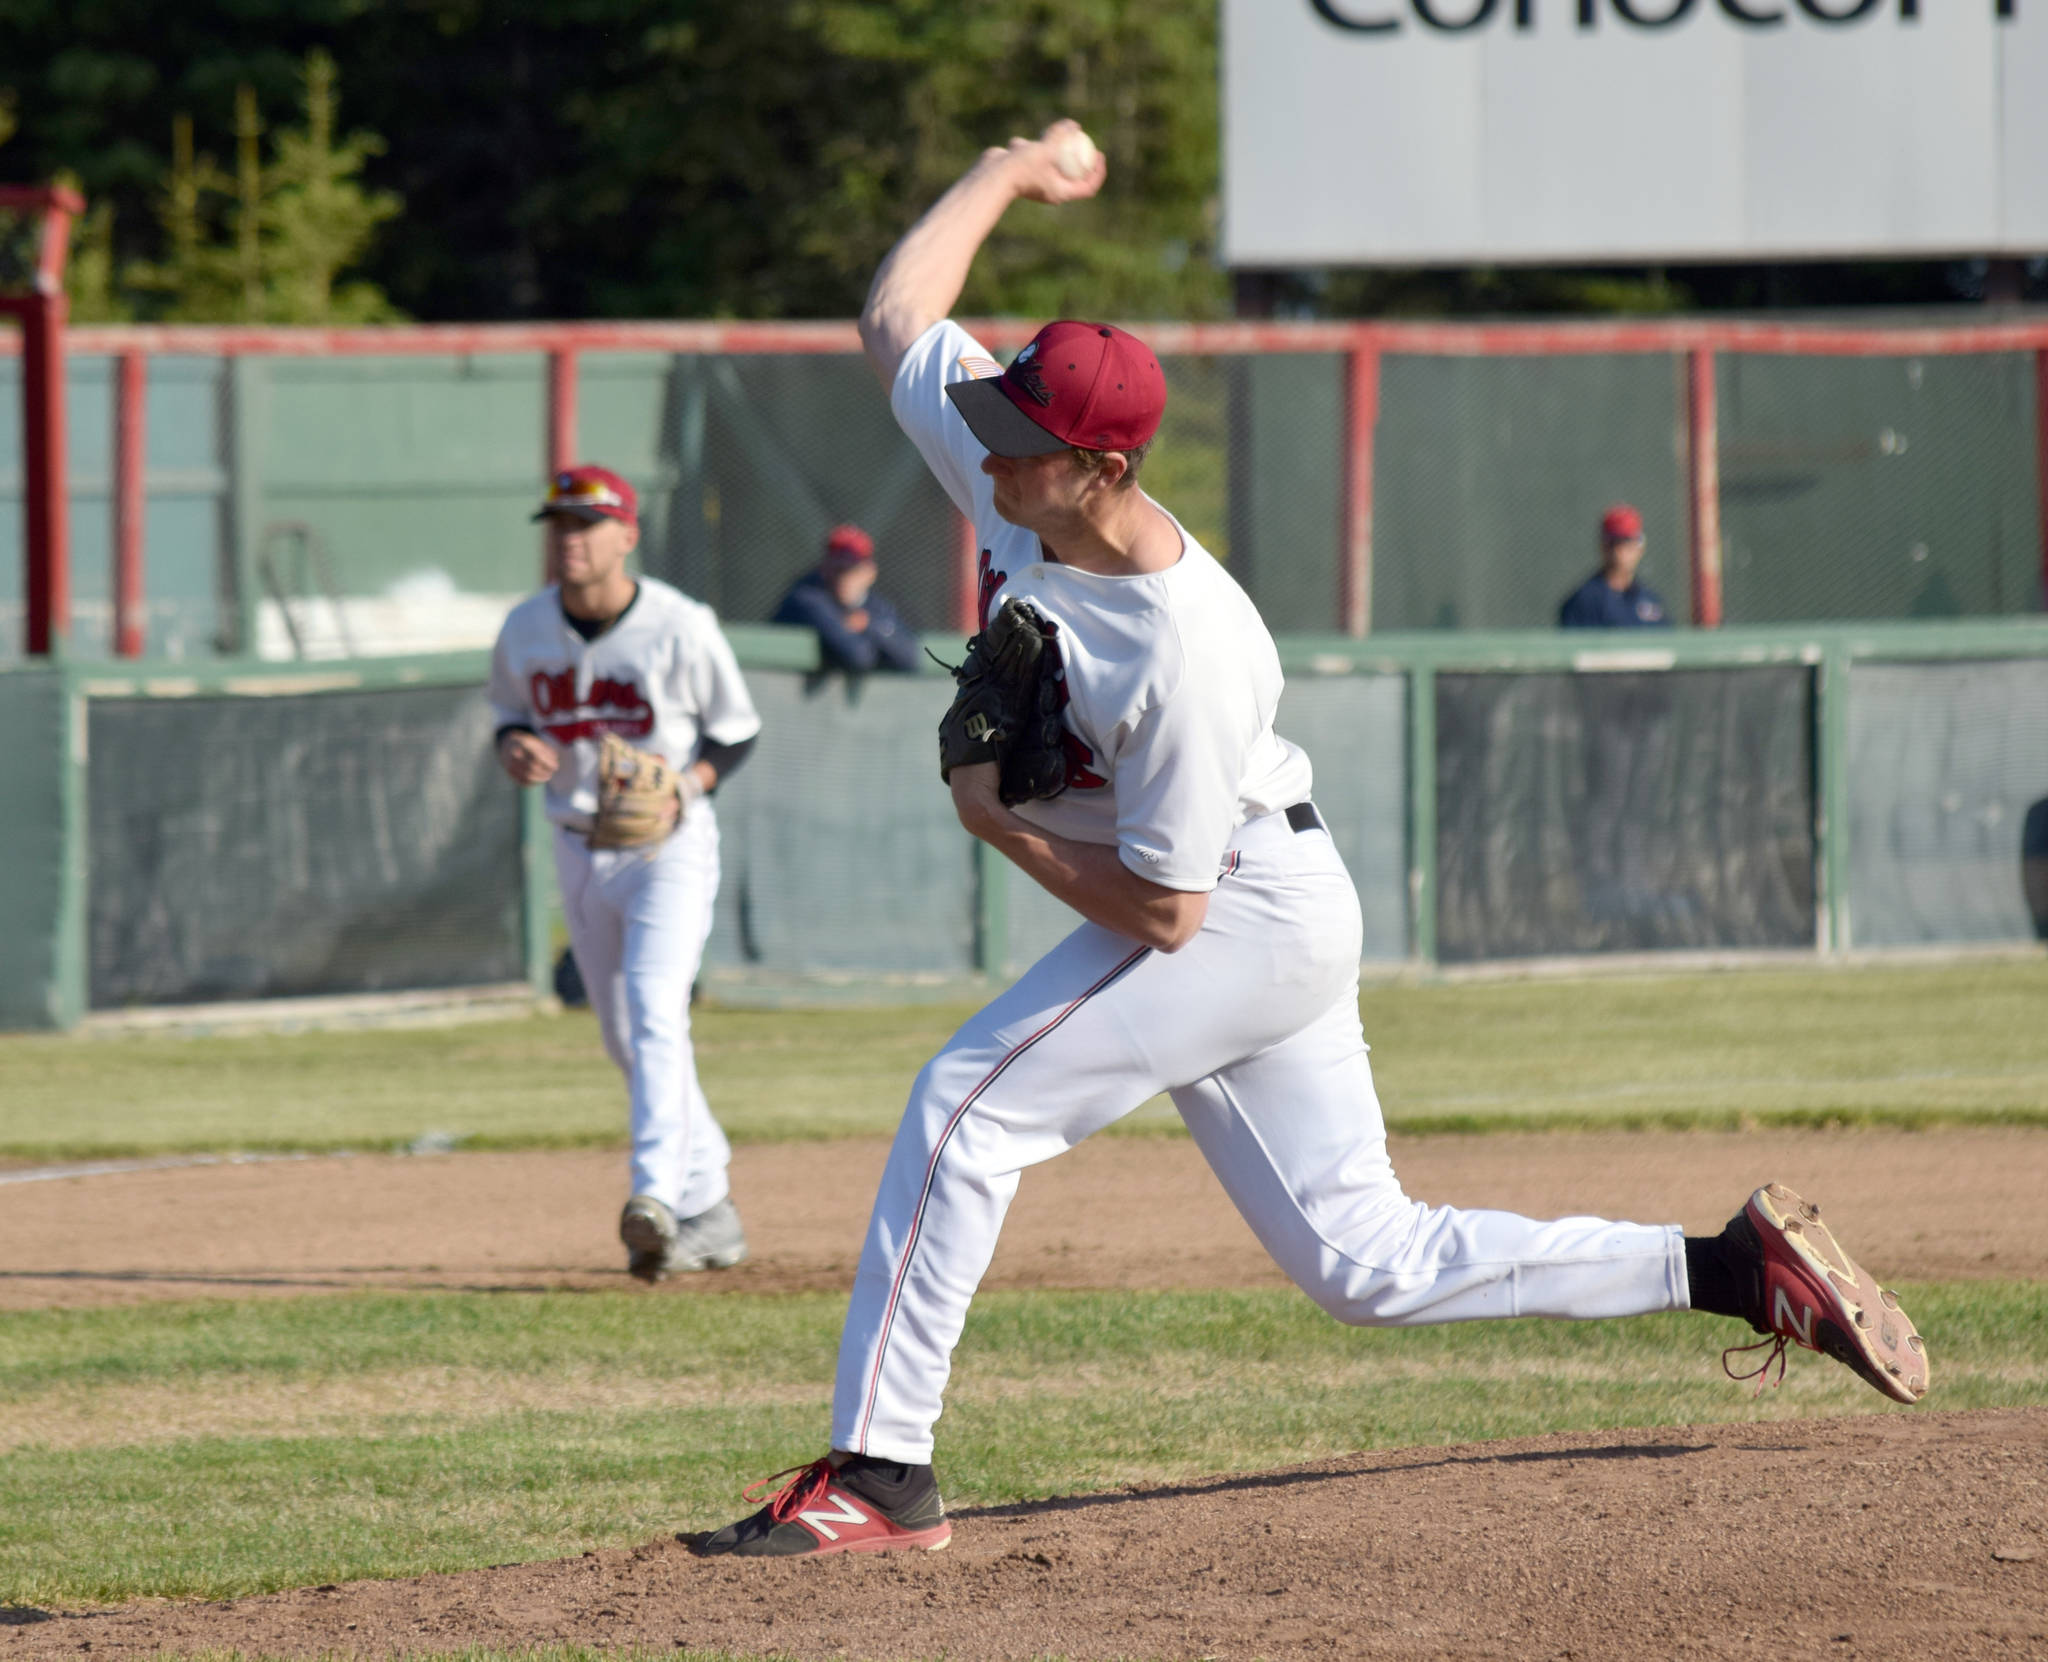 Peninsula Oilers starter Joey Becher delivers to the Chugiak-Eagle River Chinooks during the Oilers’ home opener Wednesday, June 12, 2019, at Coral Seymour Memorial Park in Kenai, Alaska. (Photo by Jeff Helminiak/Peninsula Clarion)